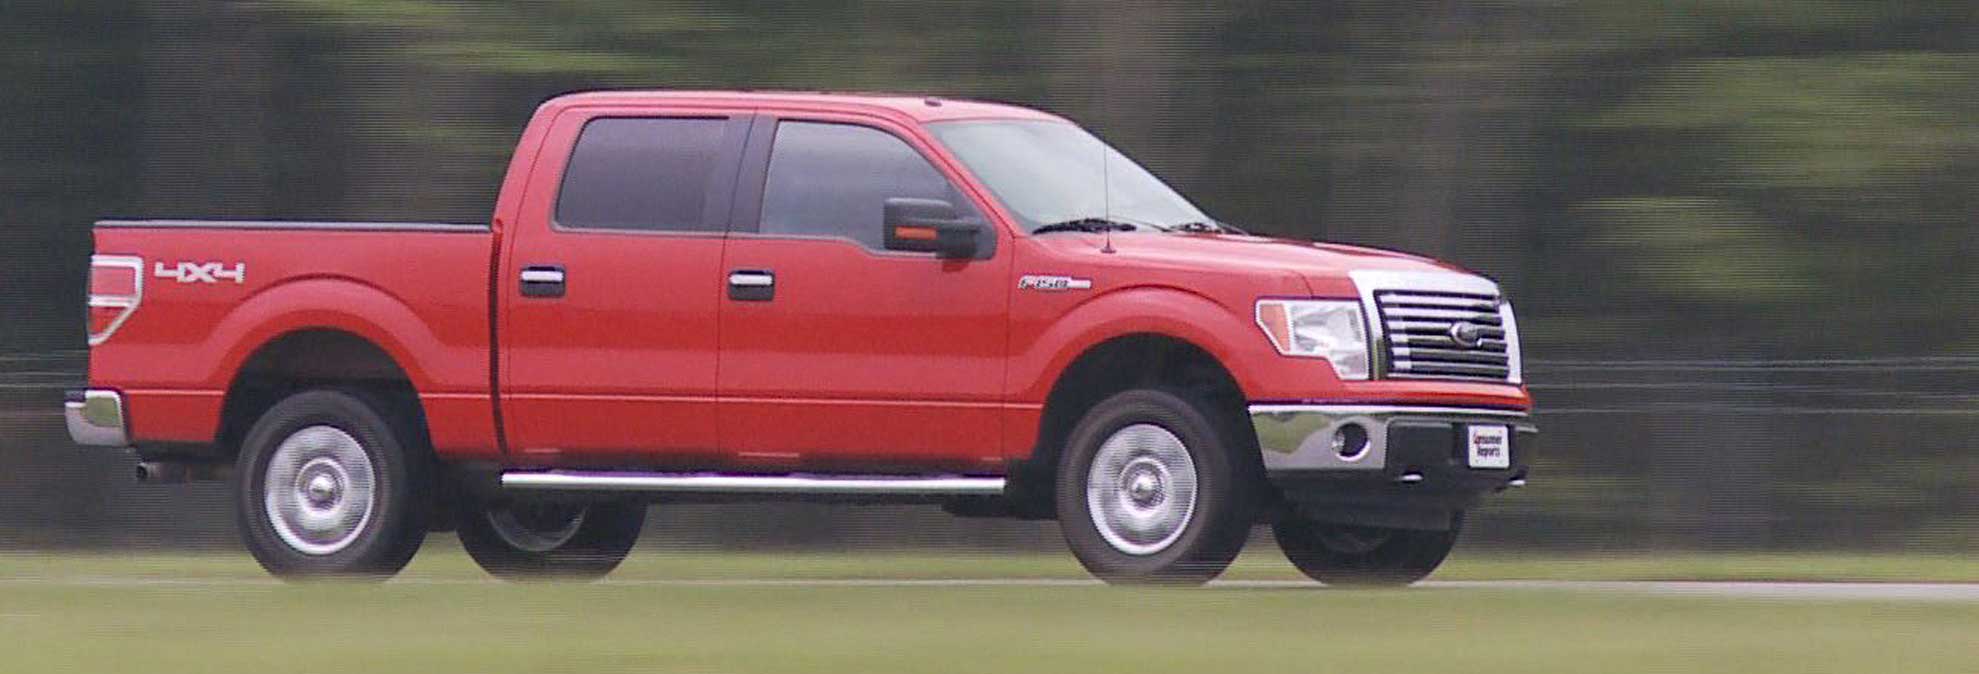 Best Pickup Truck Buying Guide  Consumer Reports